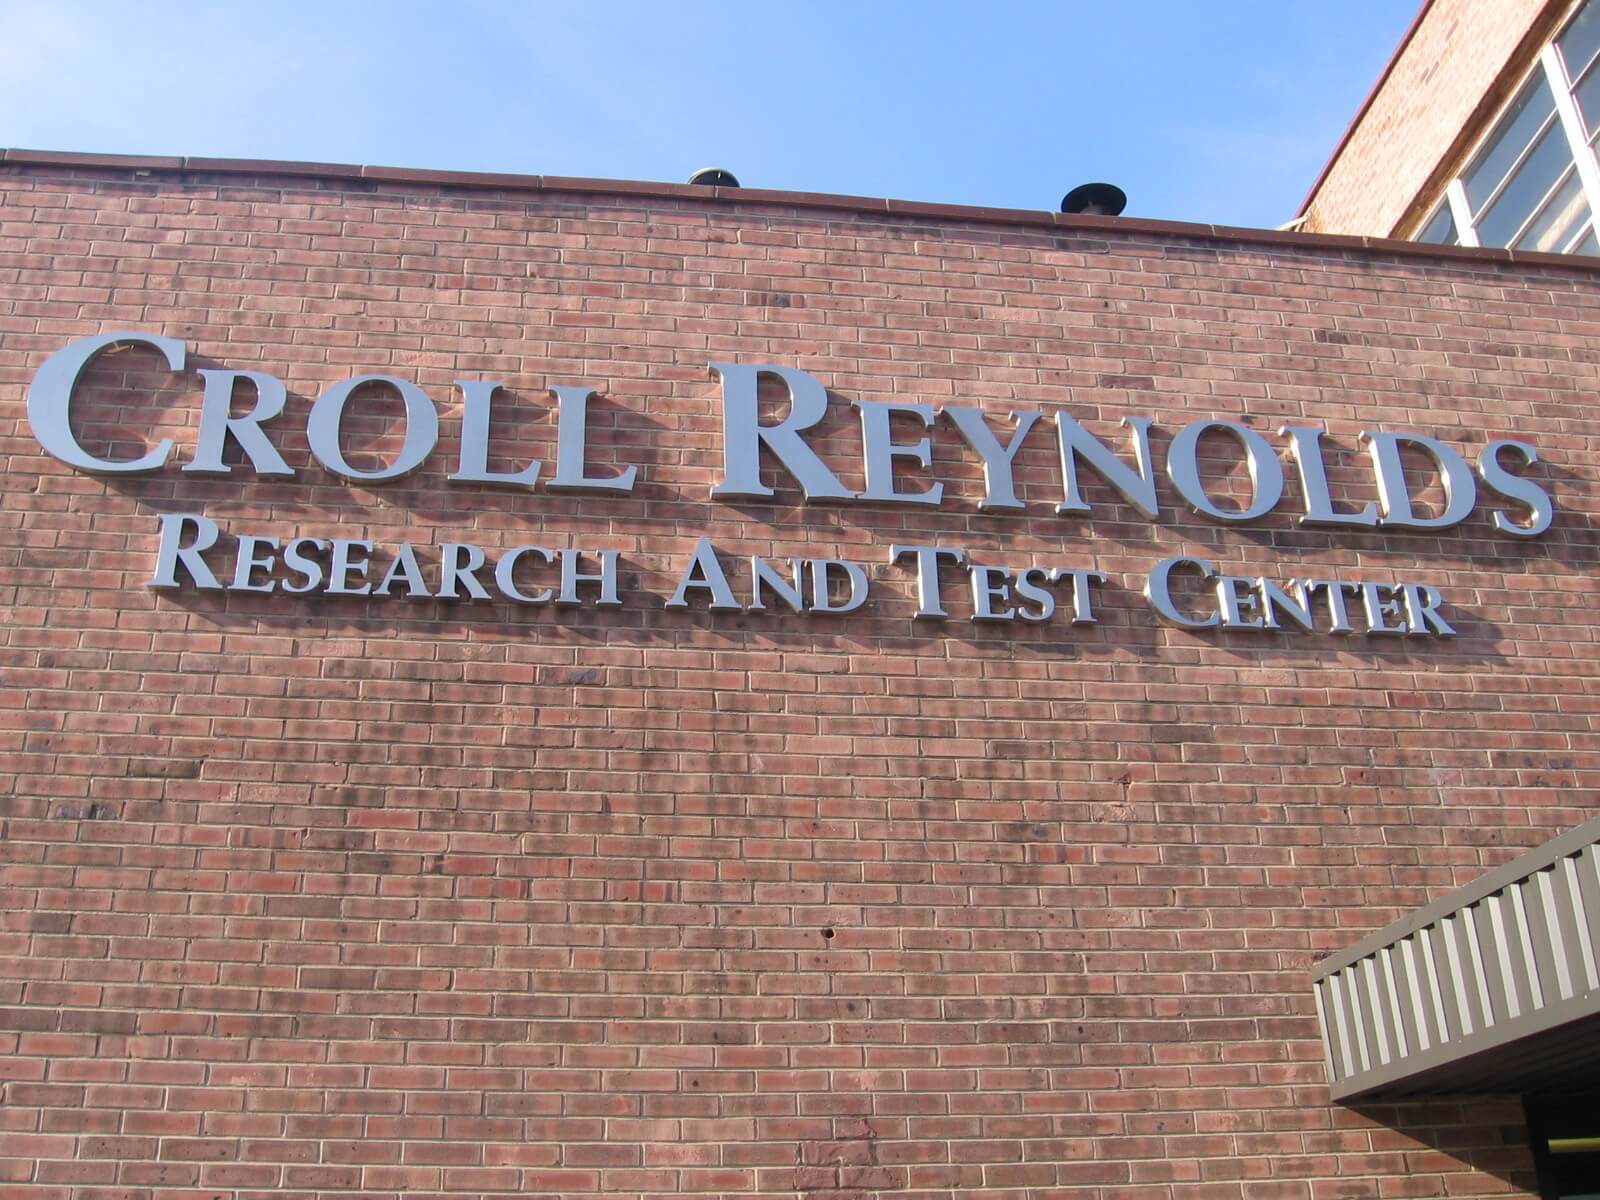 Croll Reynolds Research and Test facility